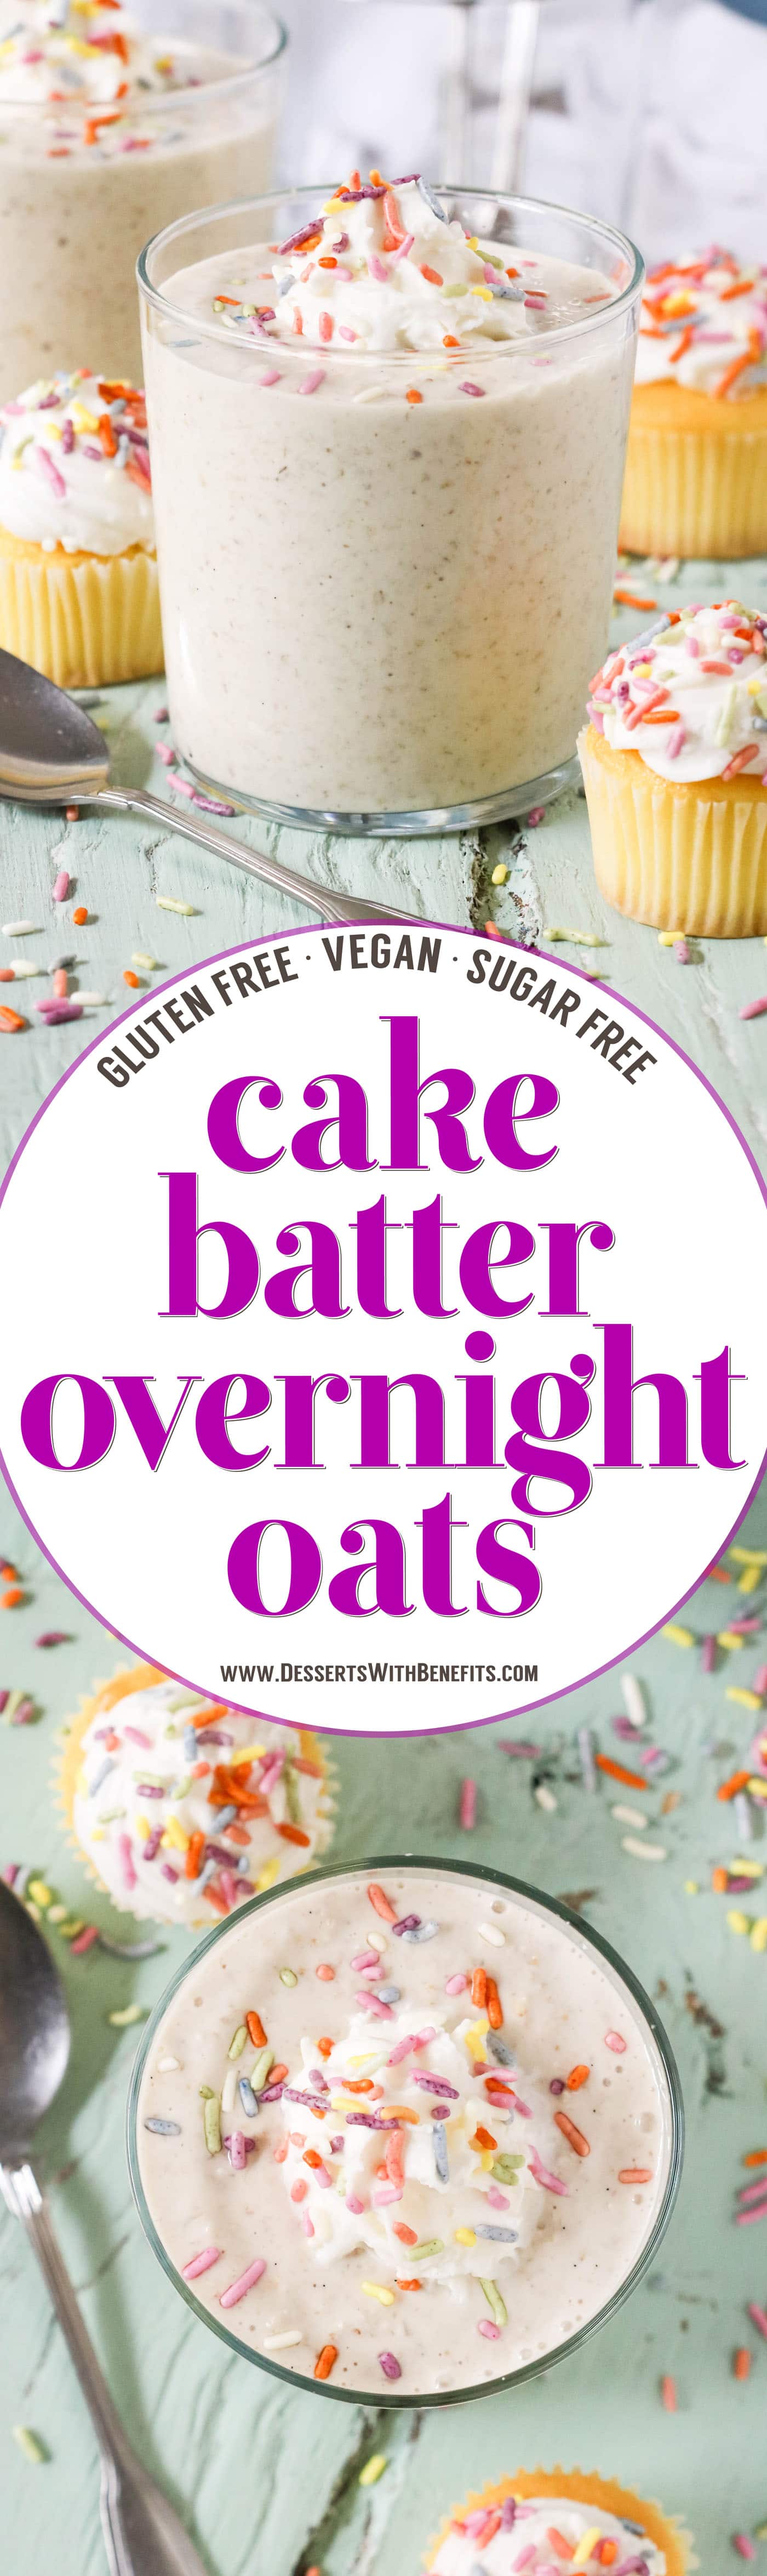 These Cake Batter Overnight Dessert Oats have all the flavor of cake, just in a healthier package!  This easy overnight oats recipe is sweet and uber filling, yet sugar free, gluten free, dairy free, and vegan.